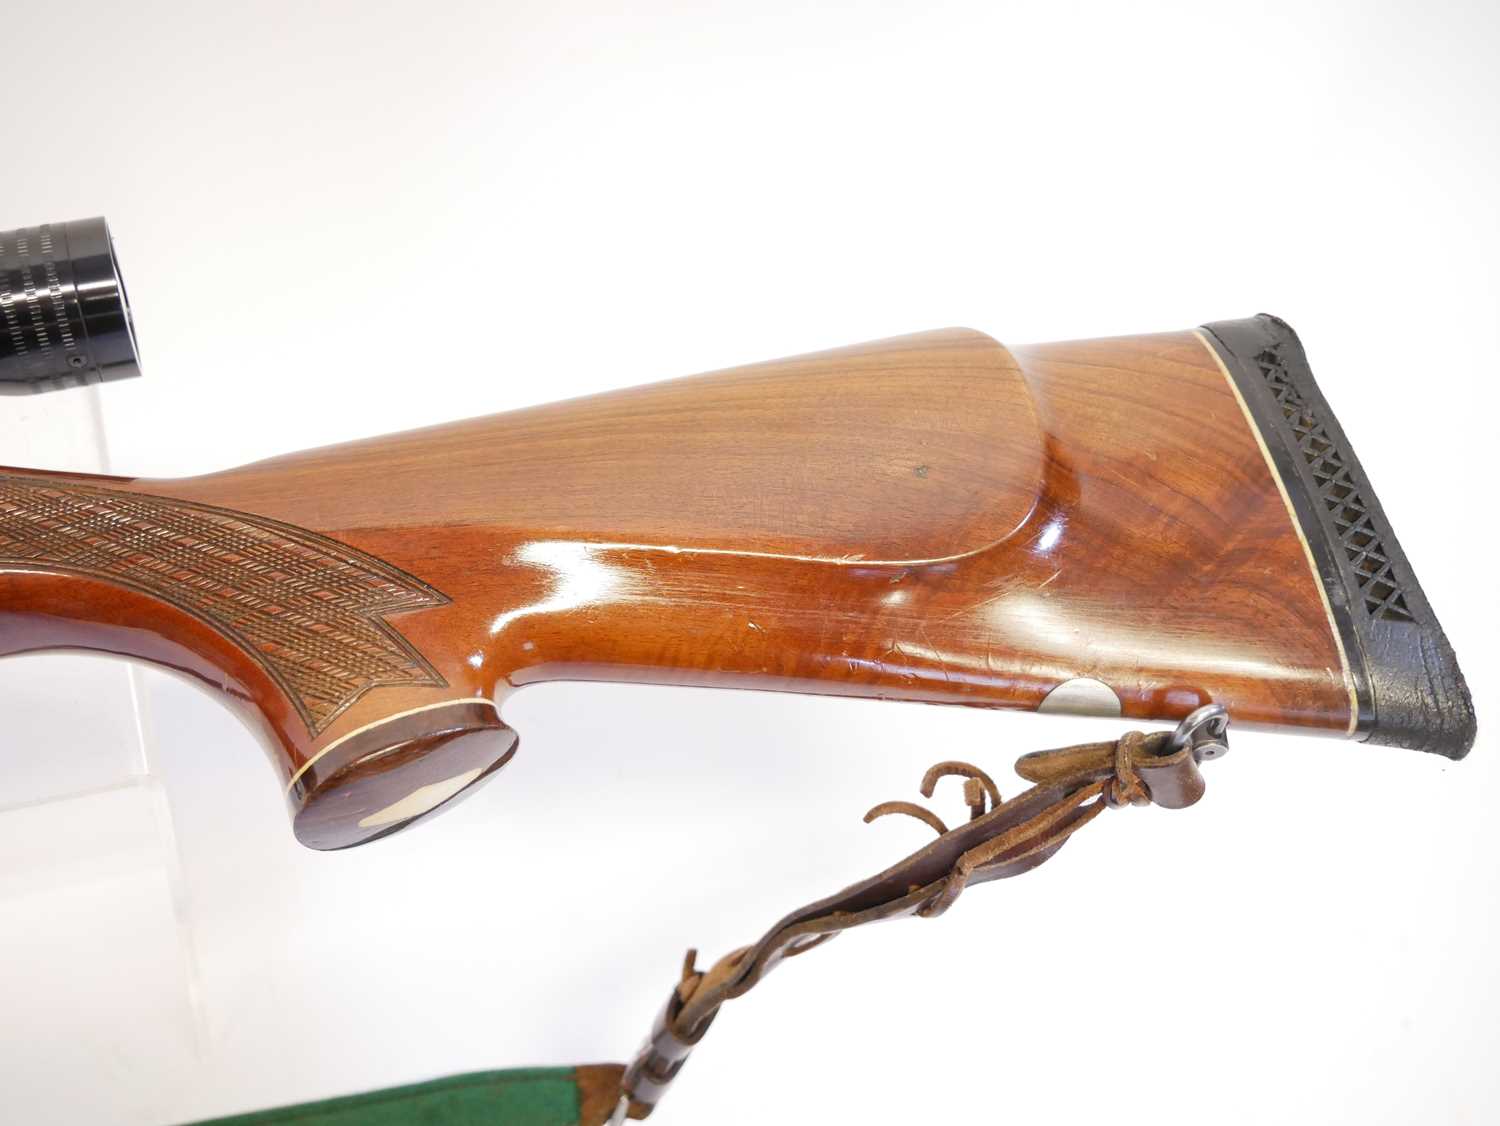 BSA .222 bolt action rifle, serial number 2P3784, 22 inch barrel, chequered stock with rosewood - Image 9 of 13